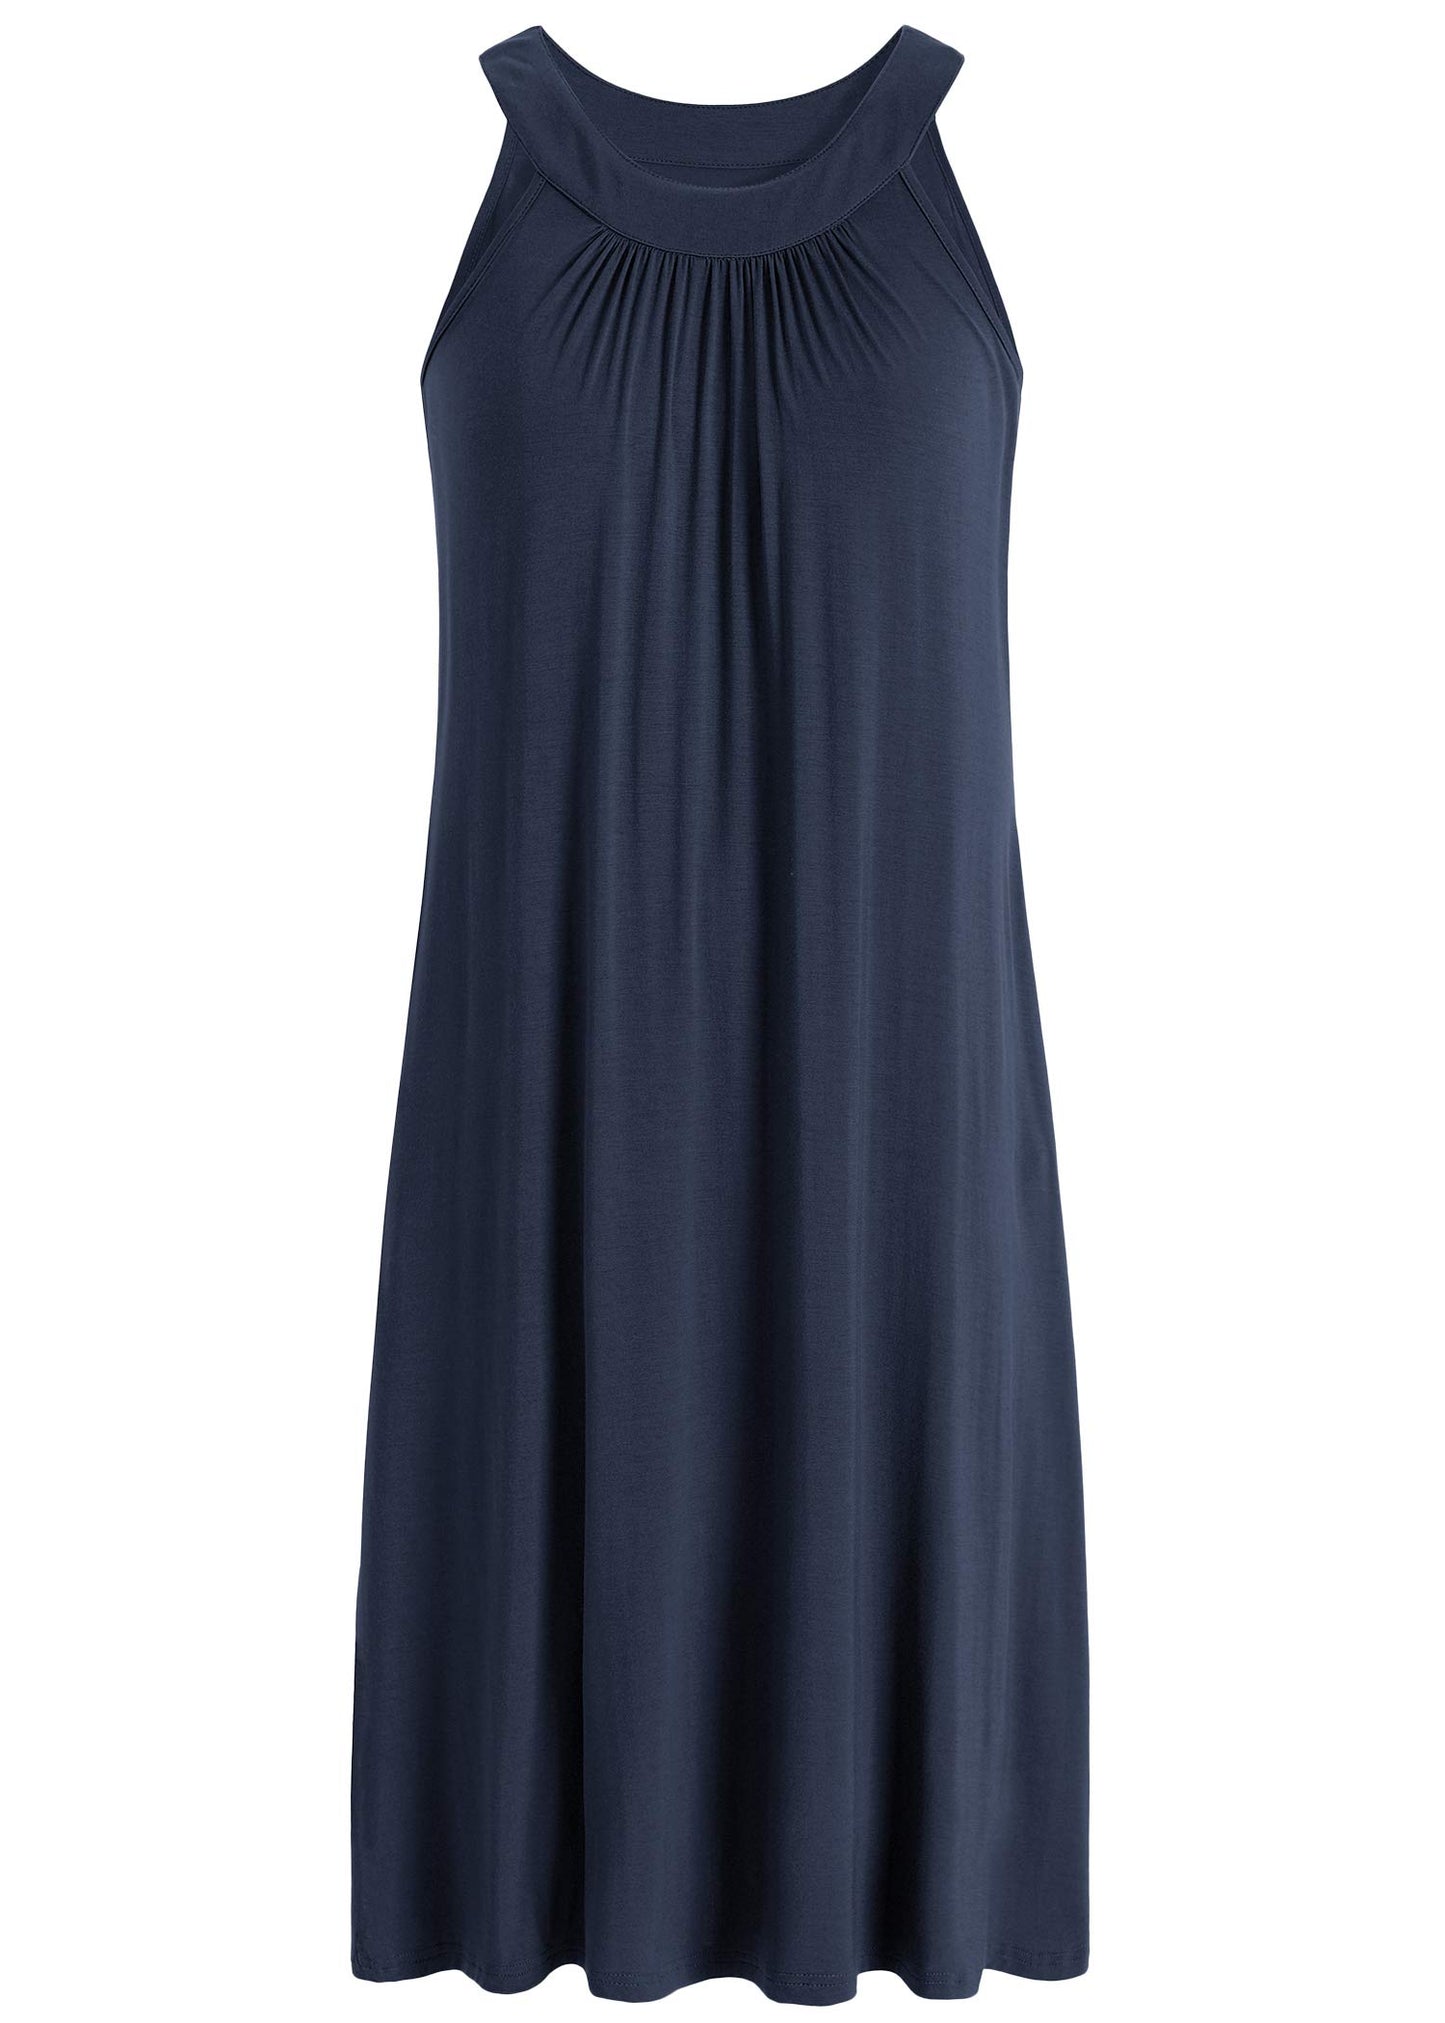 Women's Bamboo Viscose Sleeveless Nightgown with Pockets